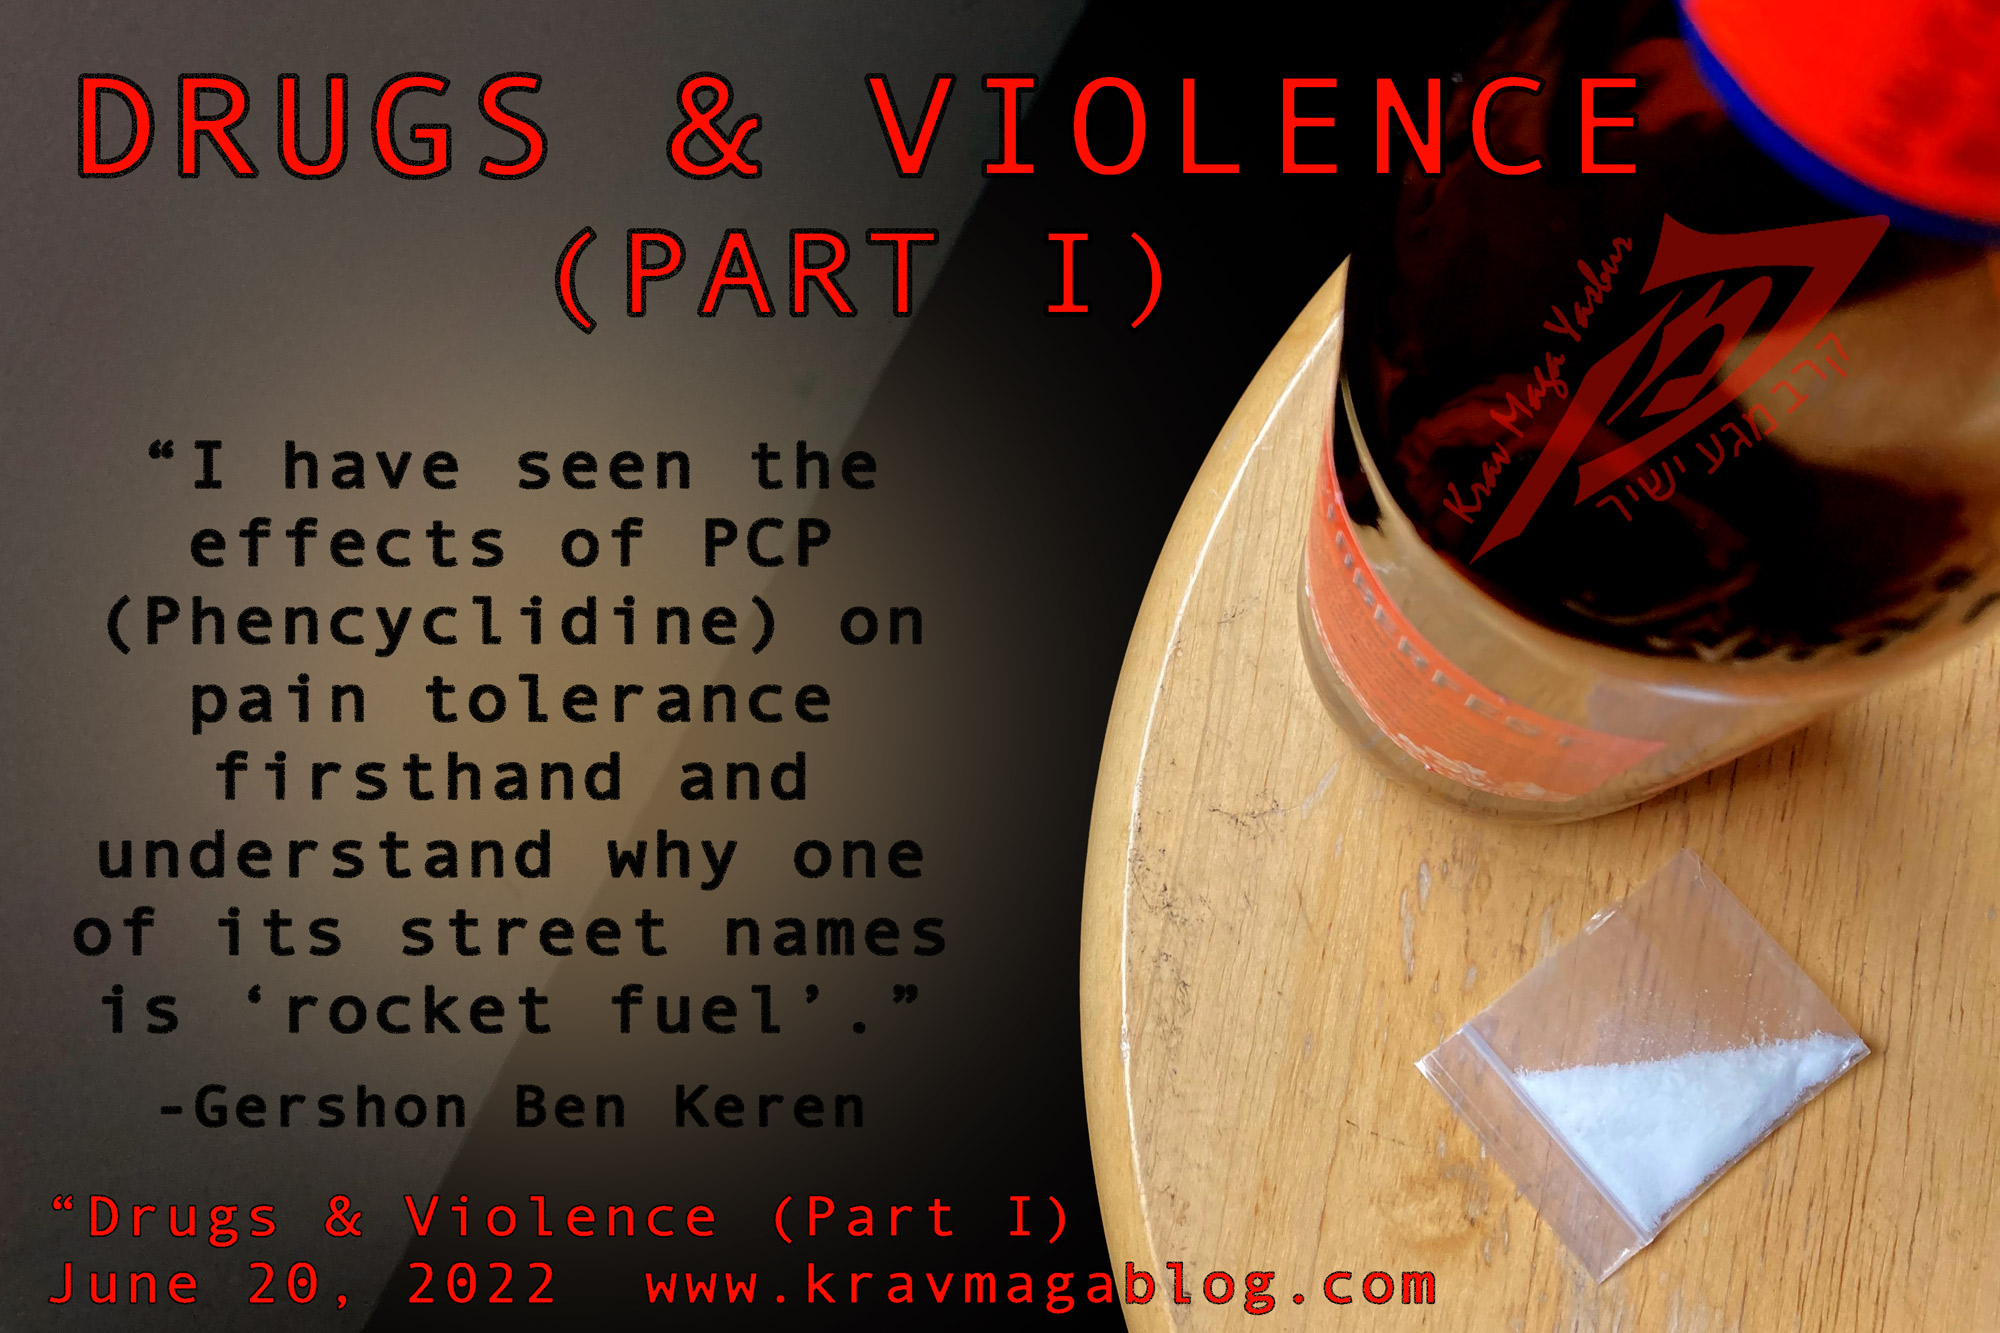 Blog About Drugs & Violence (Part One)